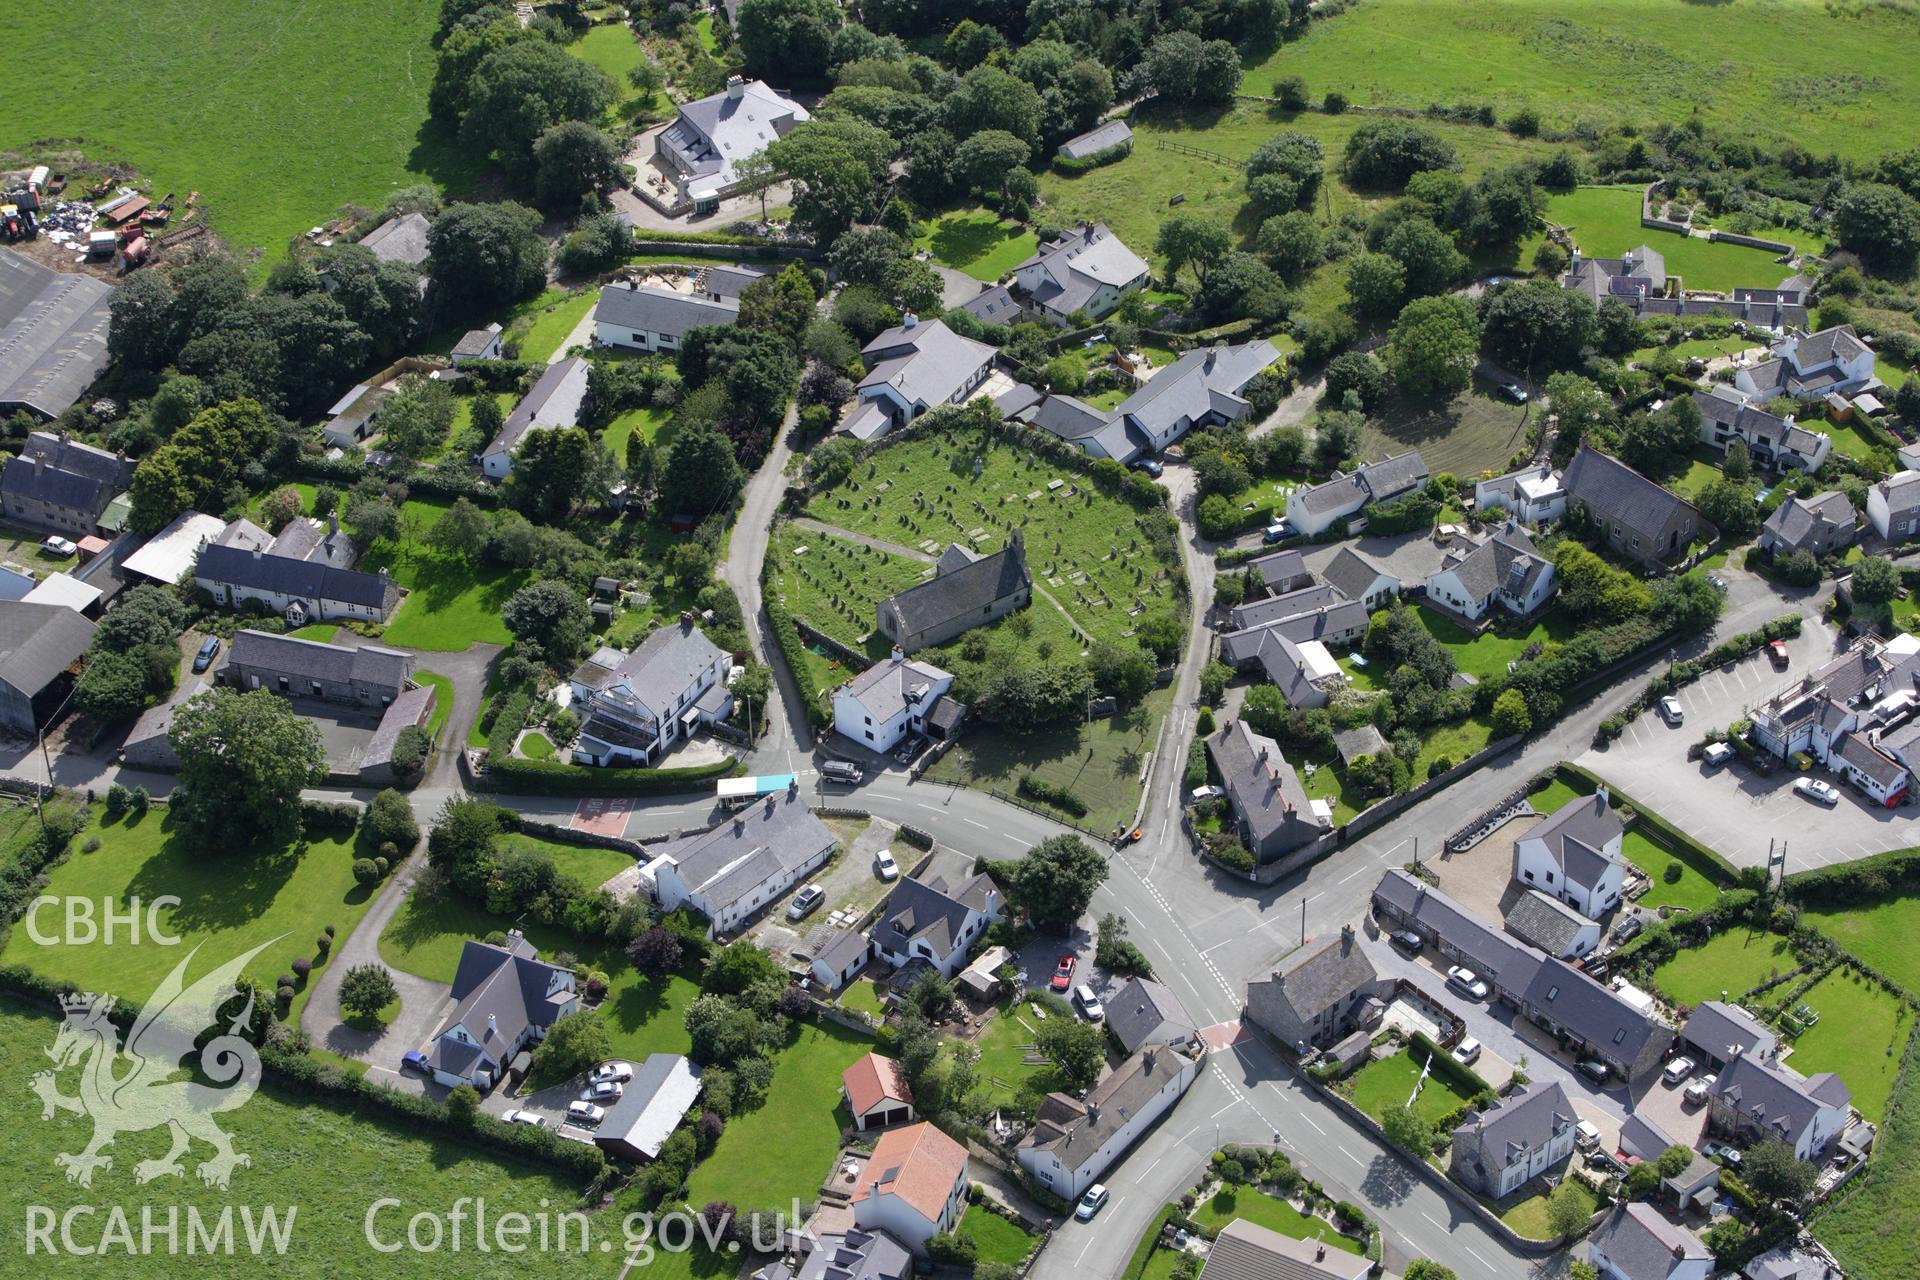 RCAHMW colour oblique aerial photograph of St Mary Magdalene's Church, Gwaenysgor, and the village. Taken on 30 July 2009 by Toby Driver